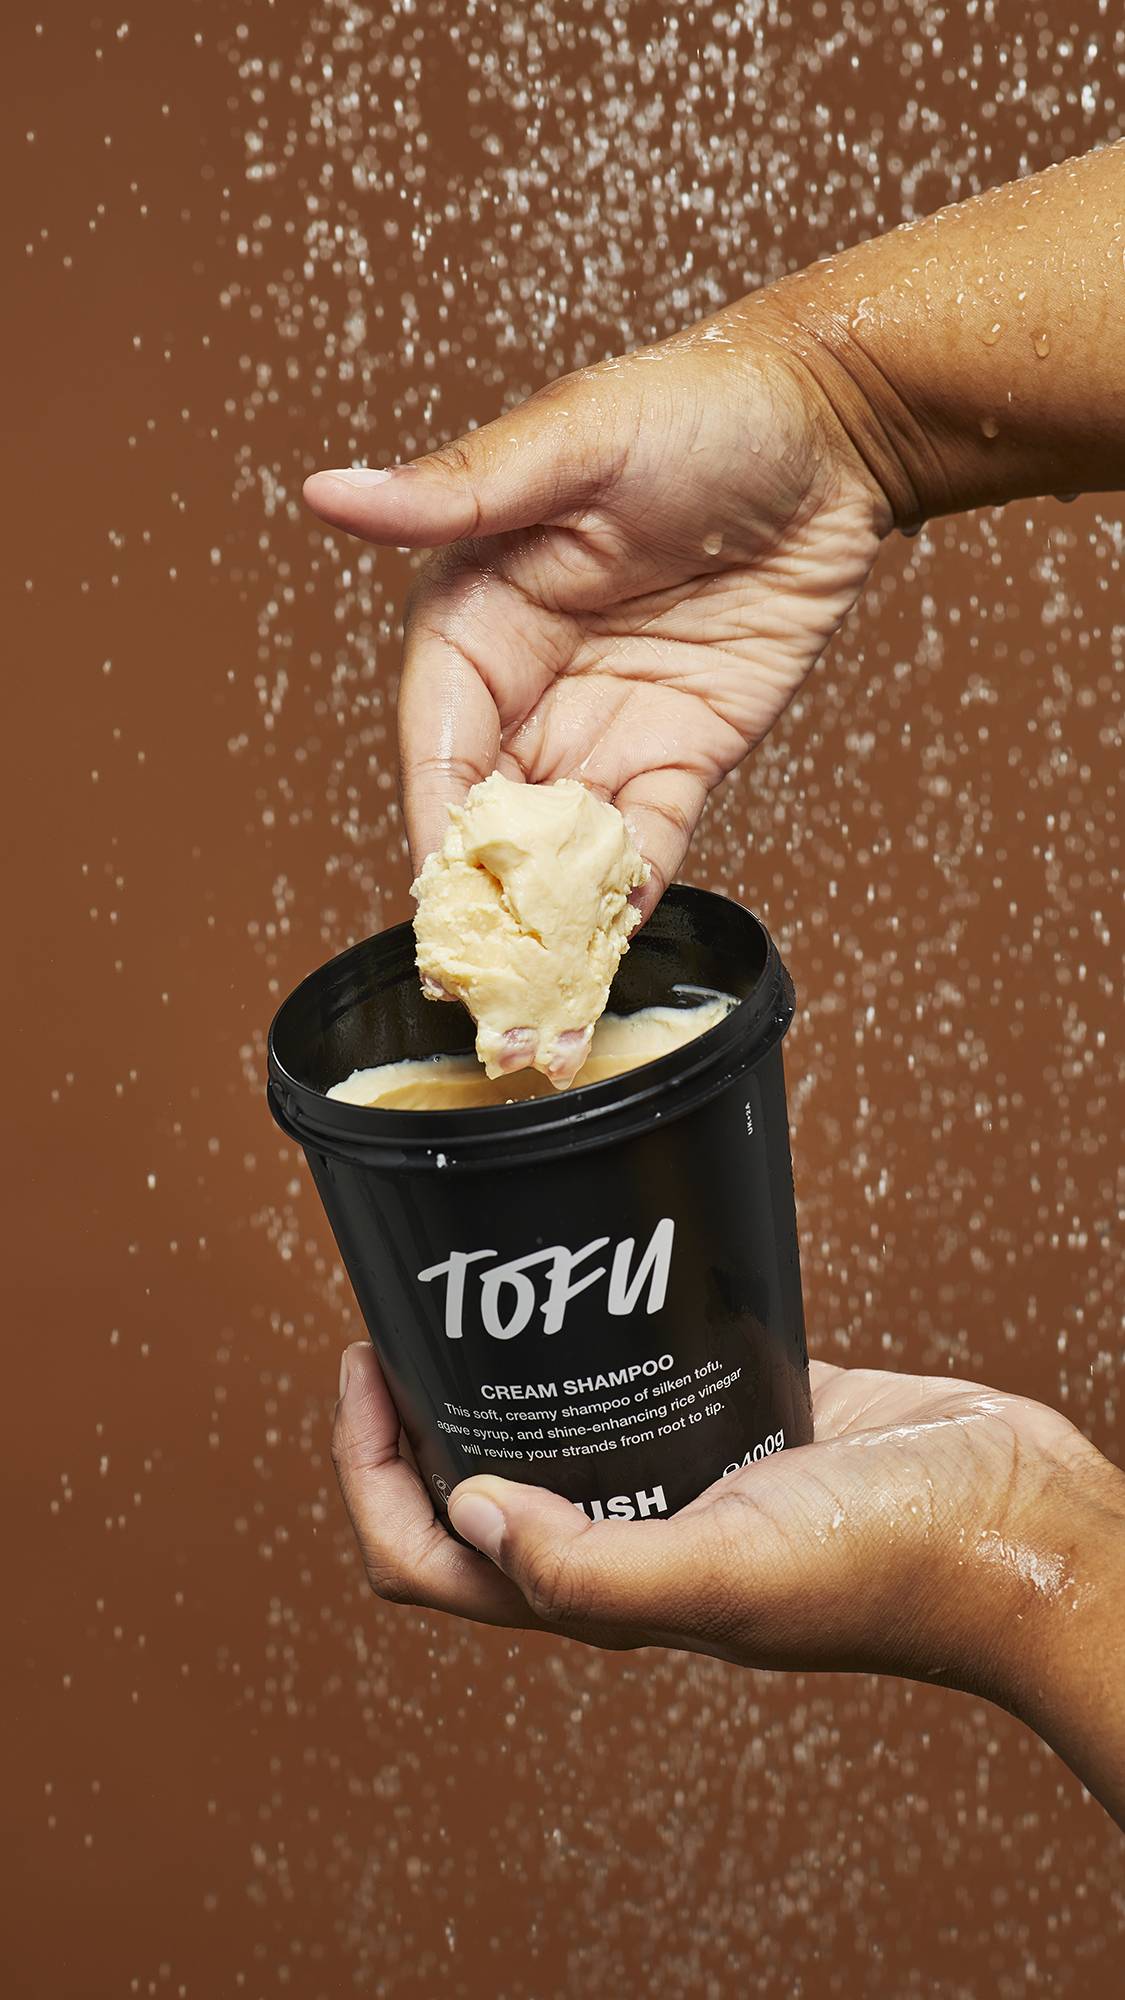 A close-up image of Tofu shampoo in a LUSH black pot under falling shower water as the model scoops out the product.